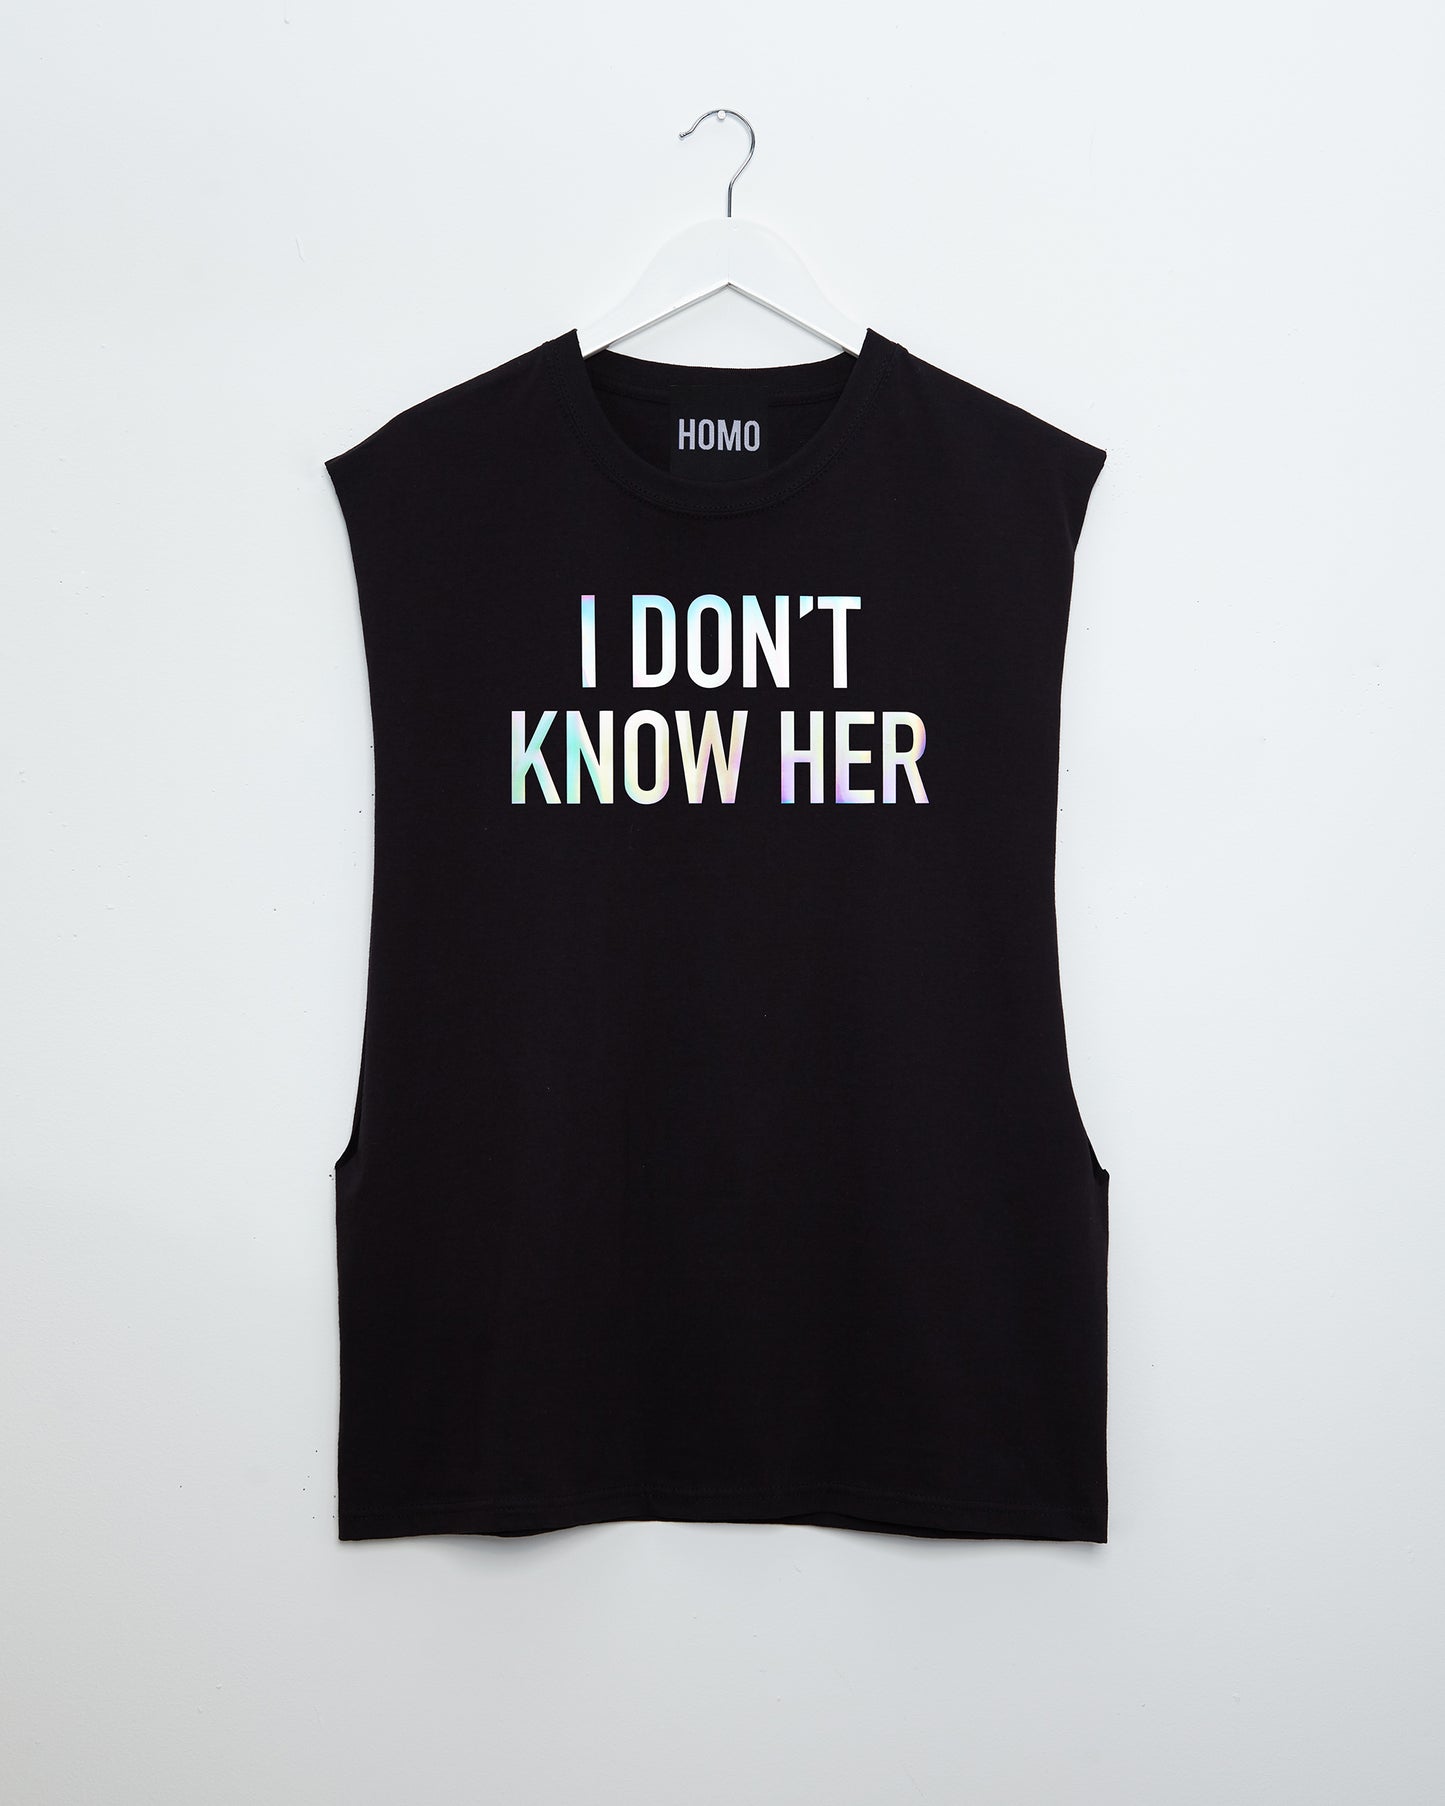 I DONT KNOW HER, sideless tee - hologram on black.